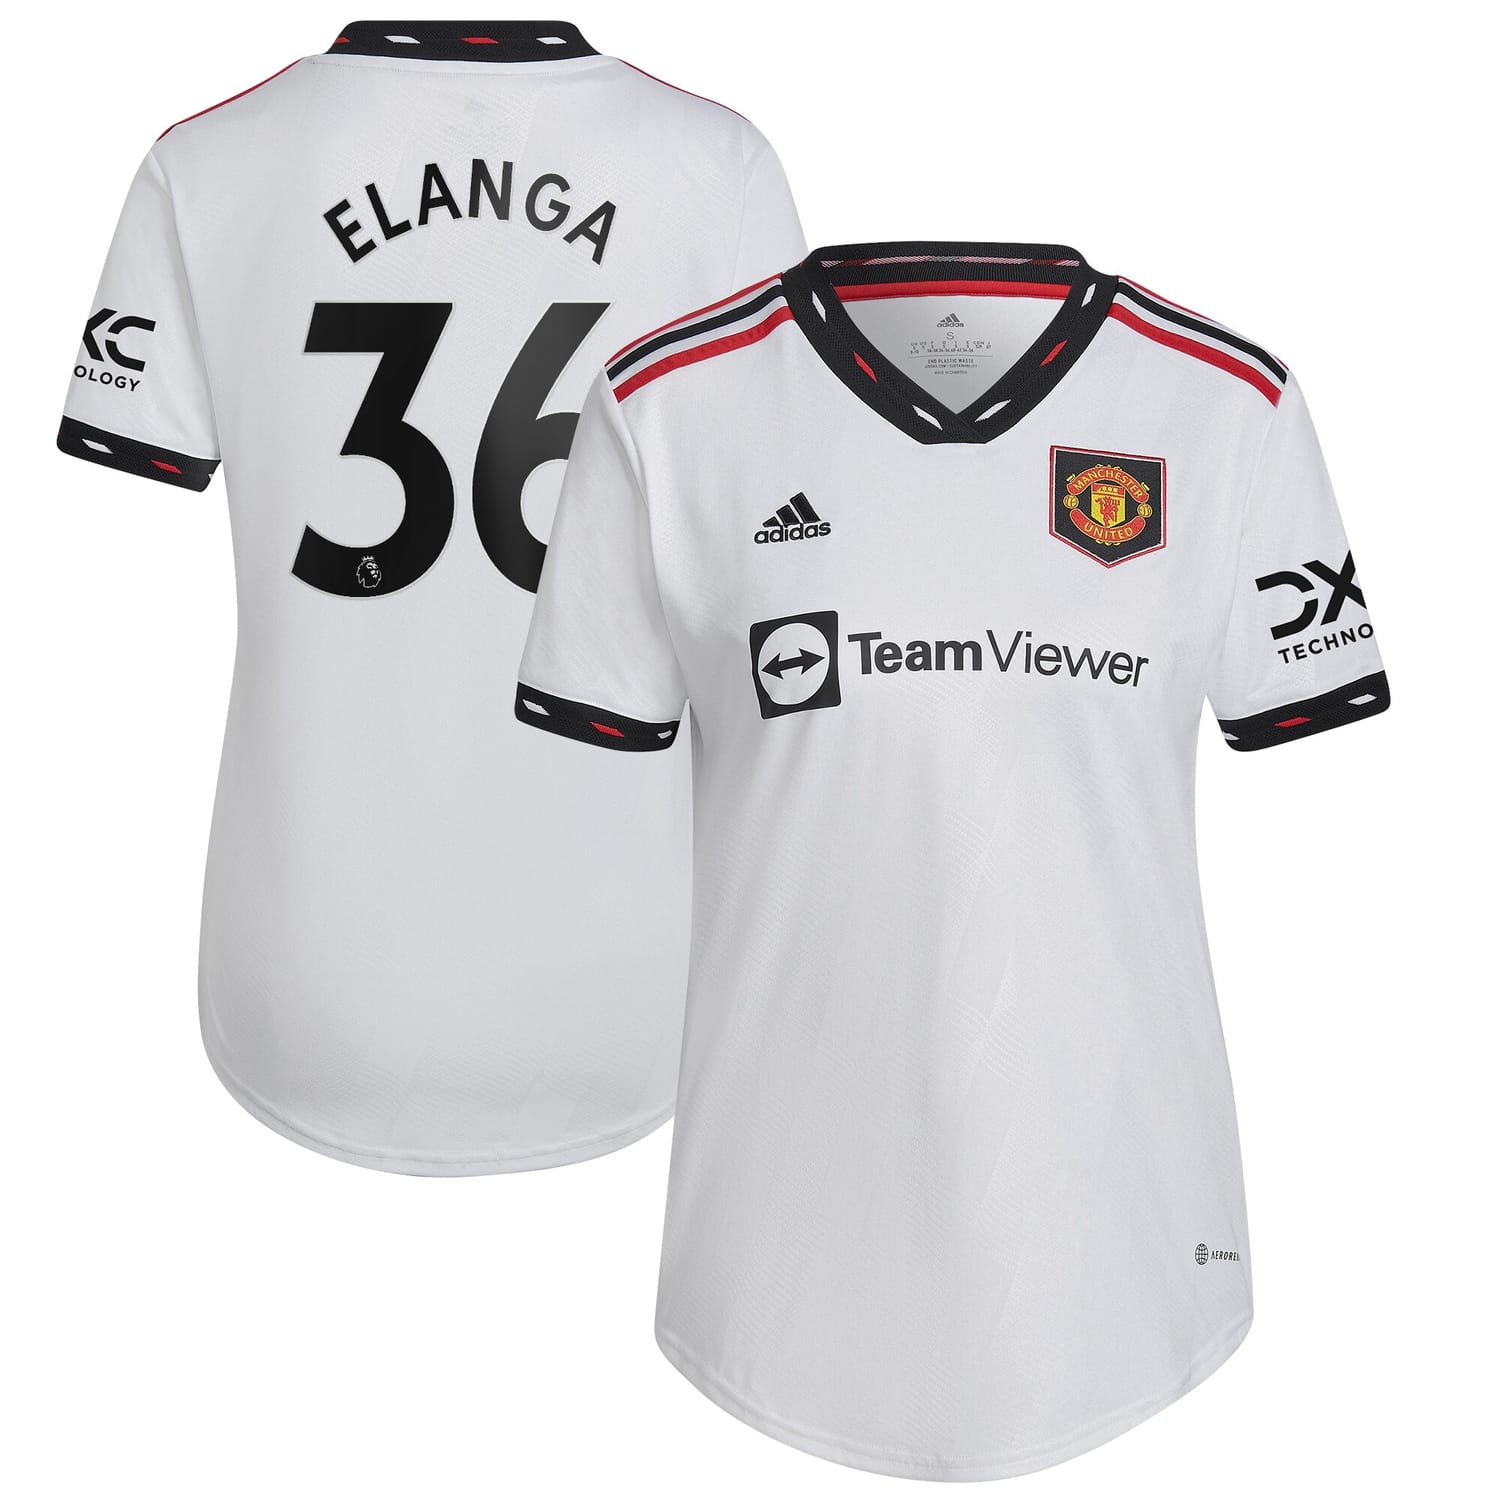 Premier League Manchester United Away Jersey Shirt White 2022-23 player Anthony Elanga printing for Women